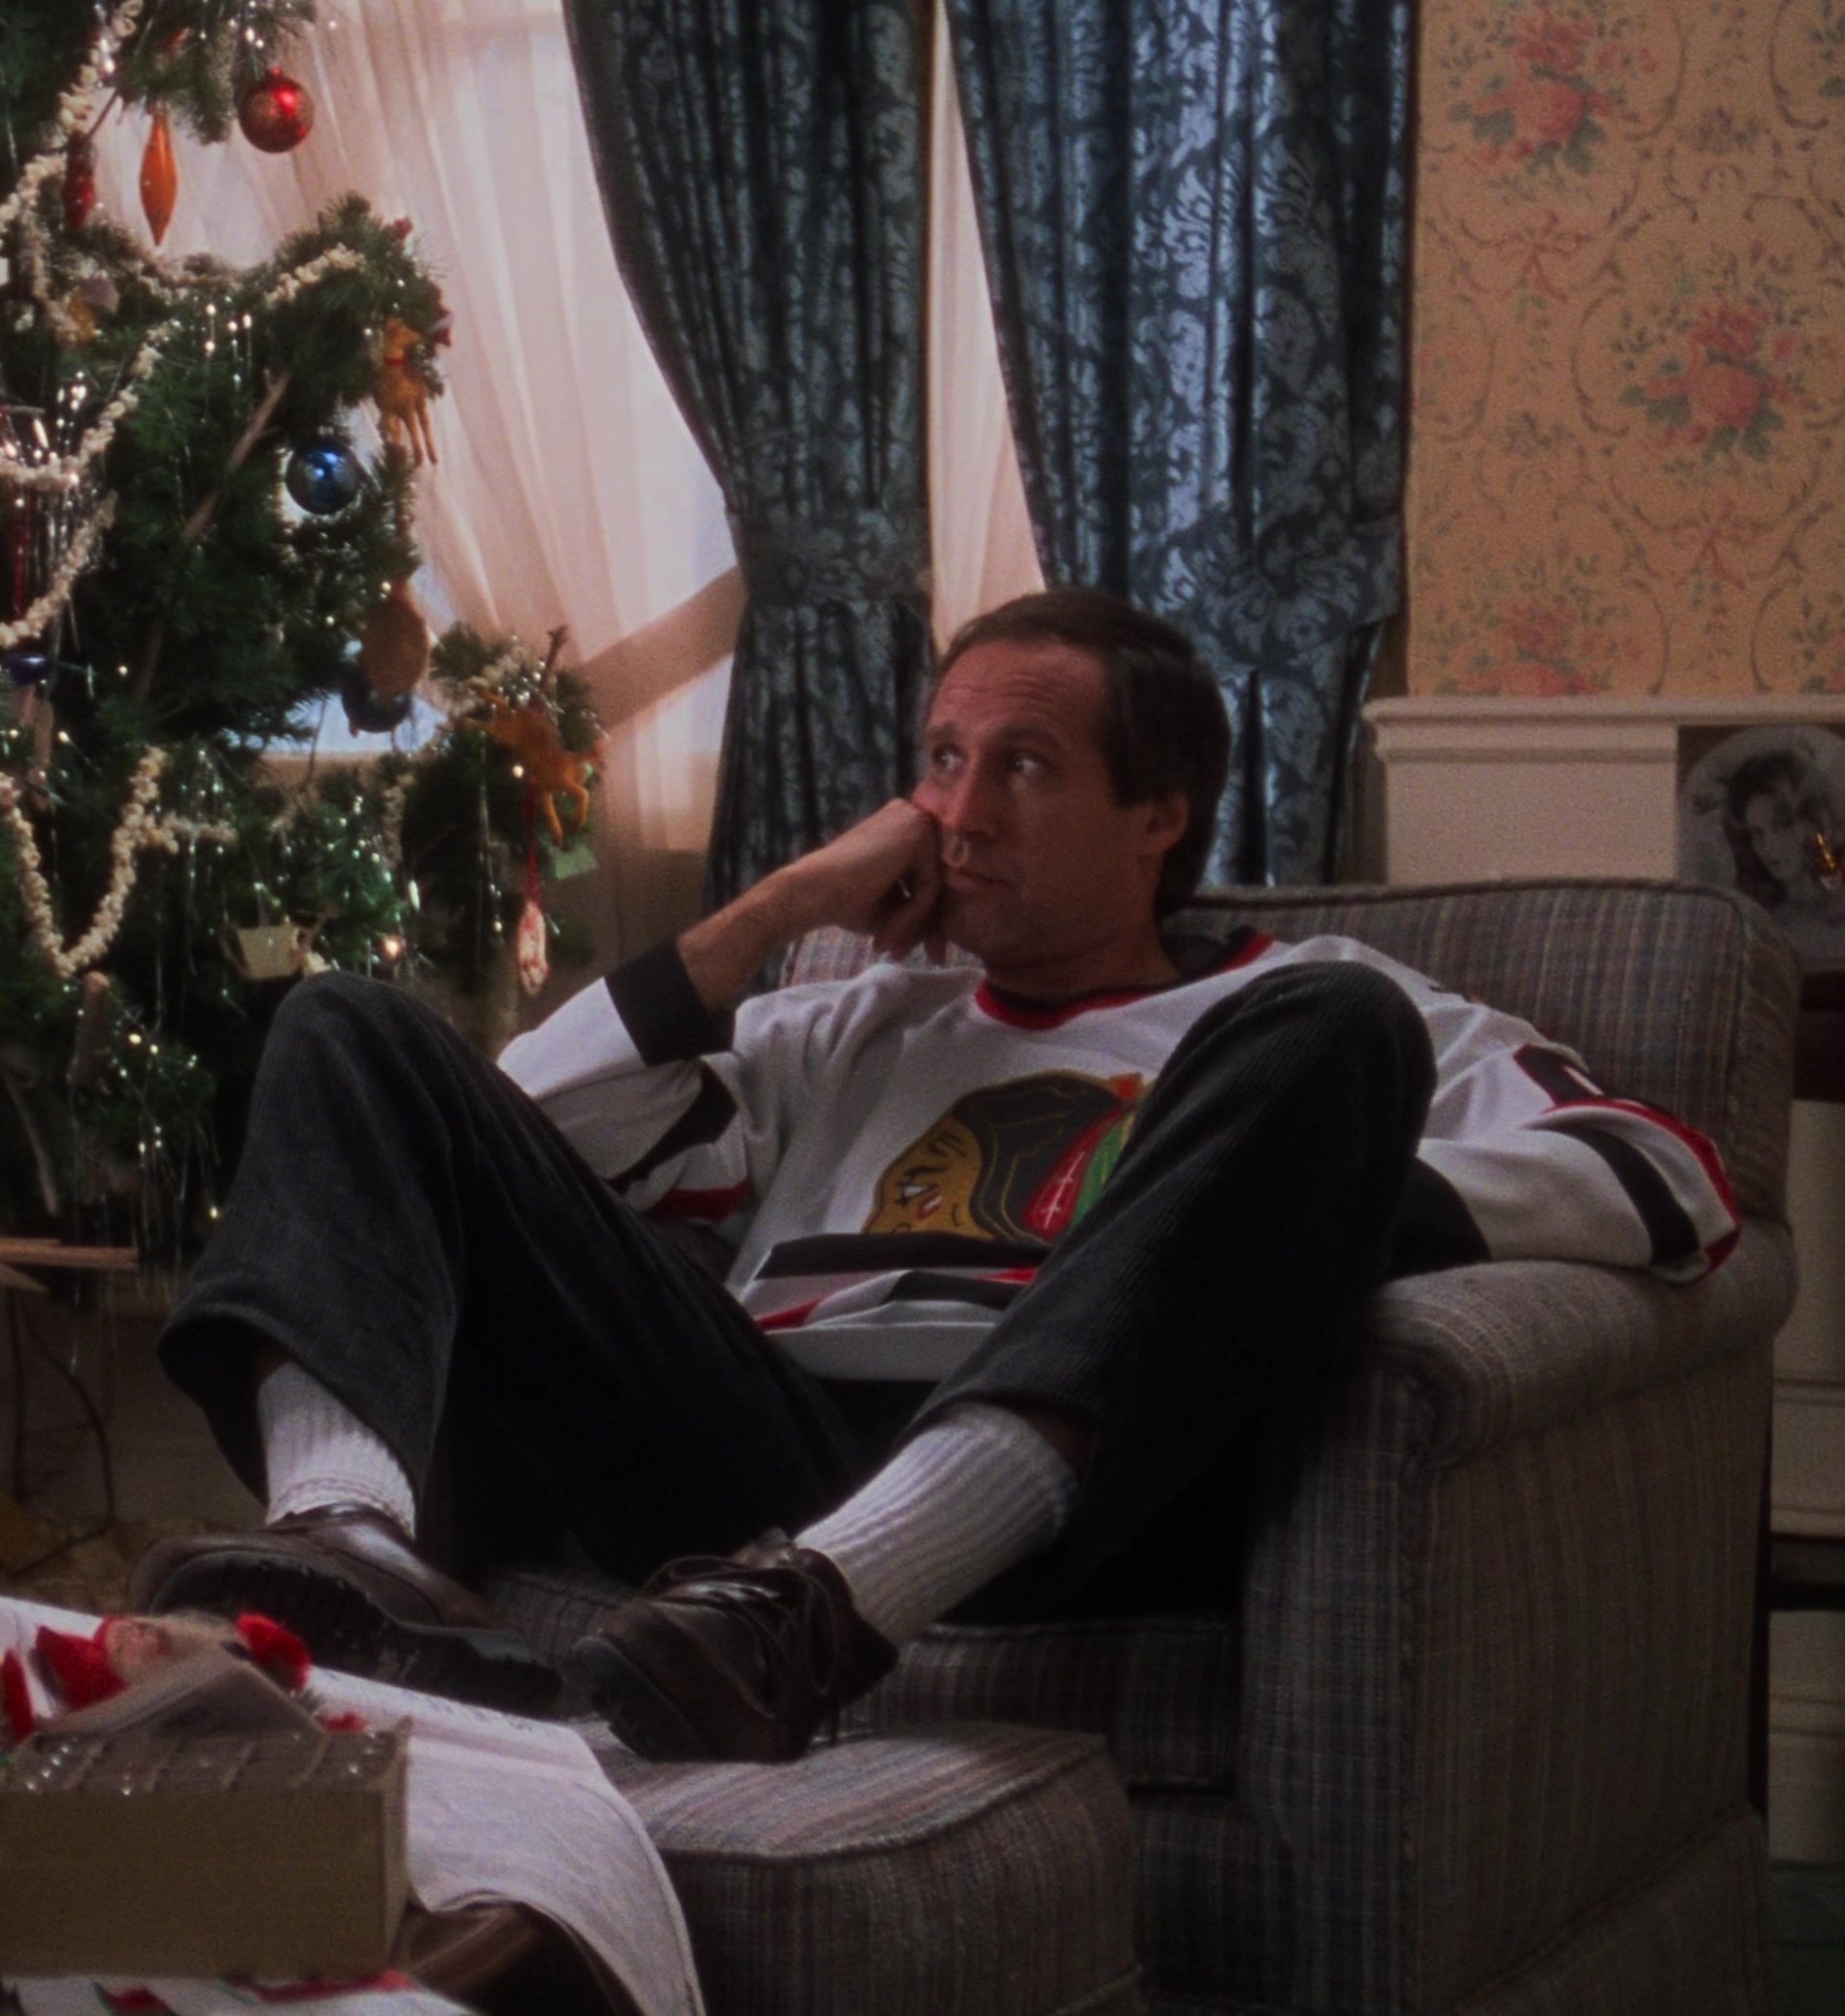 Worn on National Lampoon's Christmas Vacation (1989) Movie - Black Corduroy Trousers of Chevy Chase as Clark W. "Sparky" Griswold Jr.